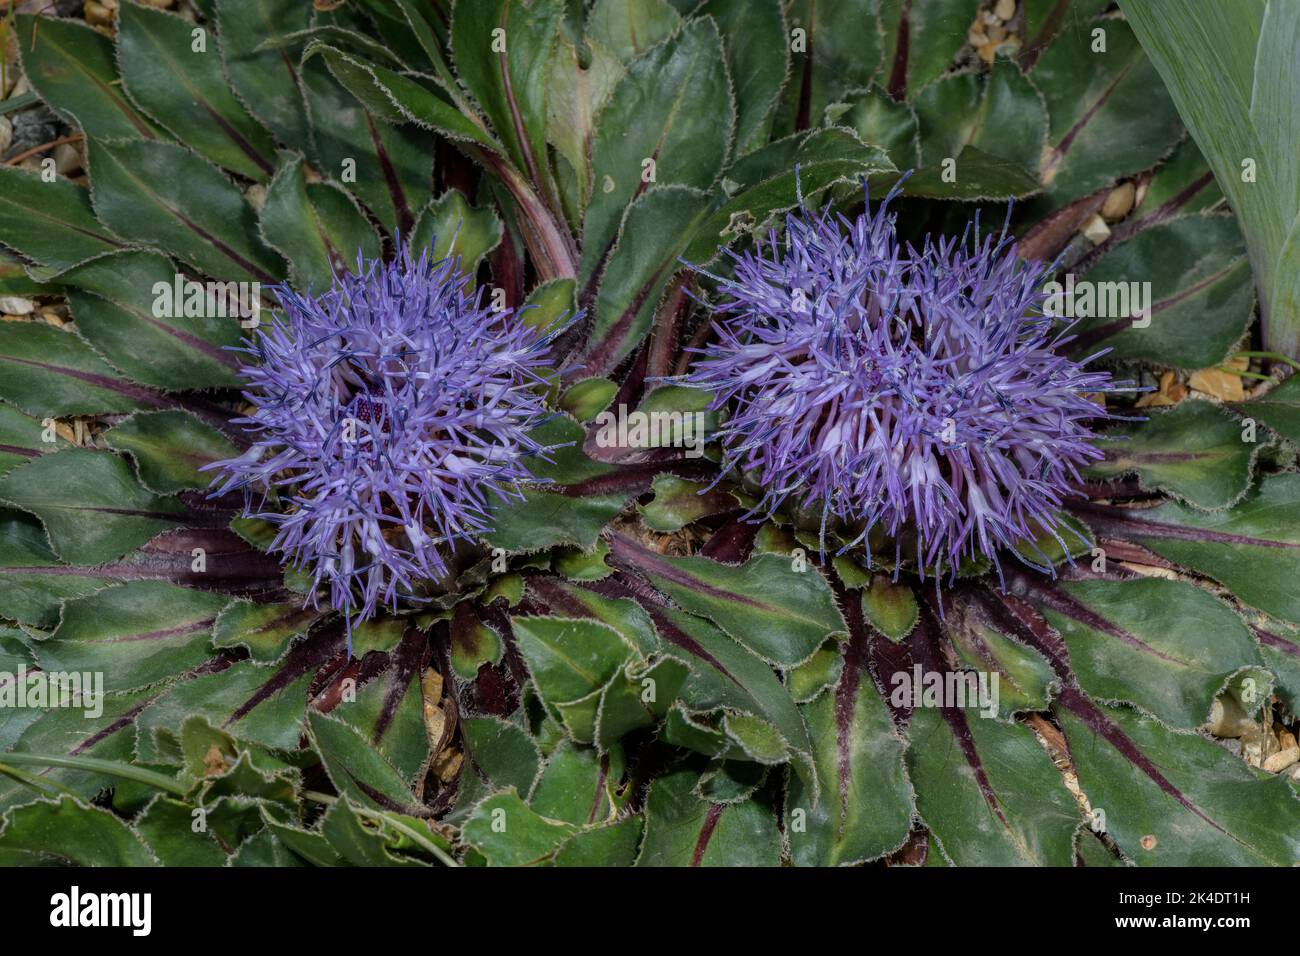 Carthamus rhaponticoides, endemic to Morocco and adjacent areas. Stock Photo